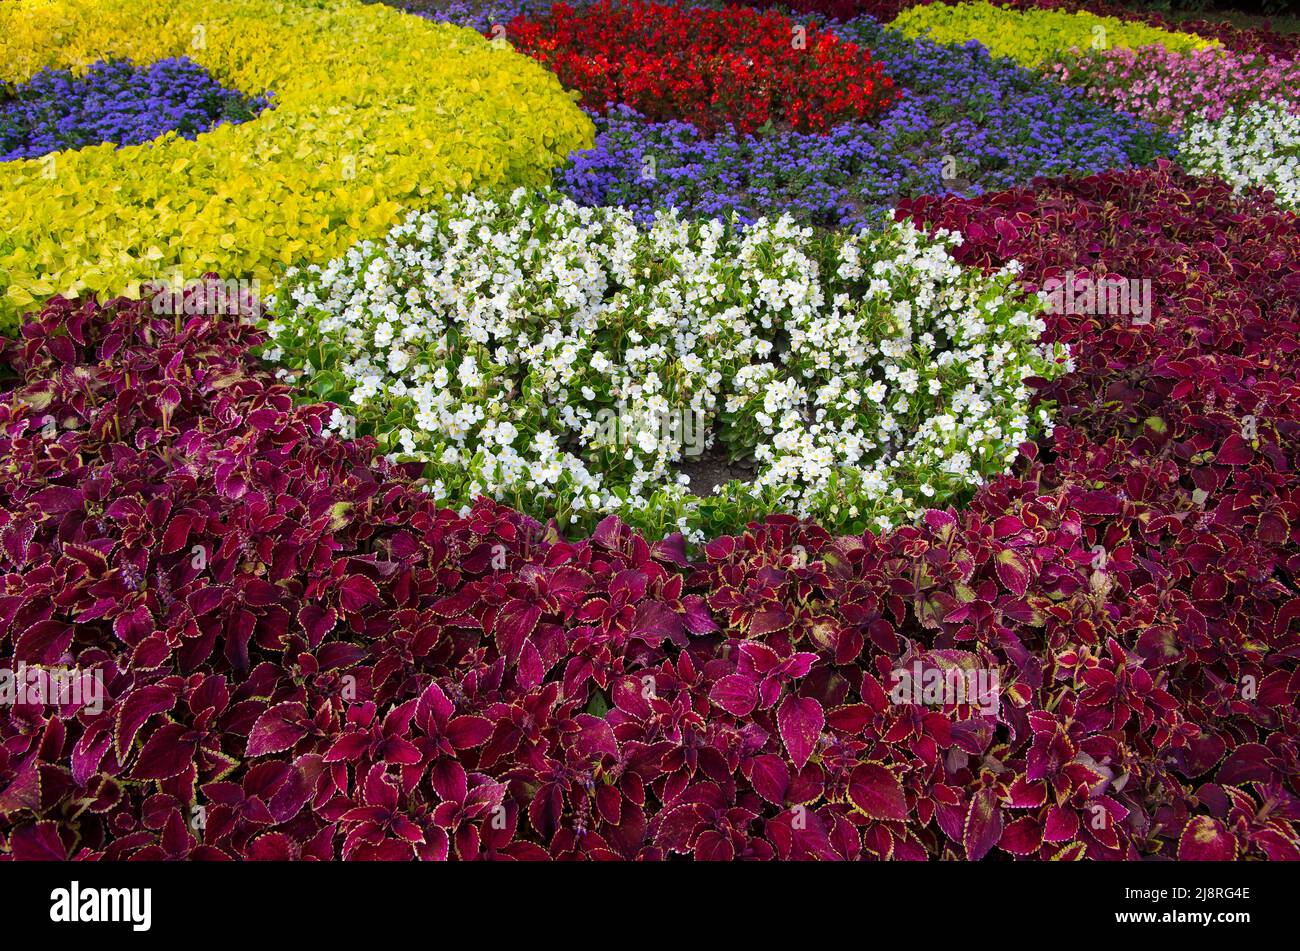 Garden of beautiful and colouful flowers. Stock Photo